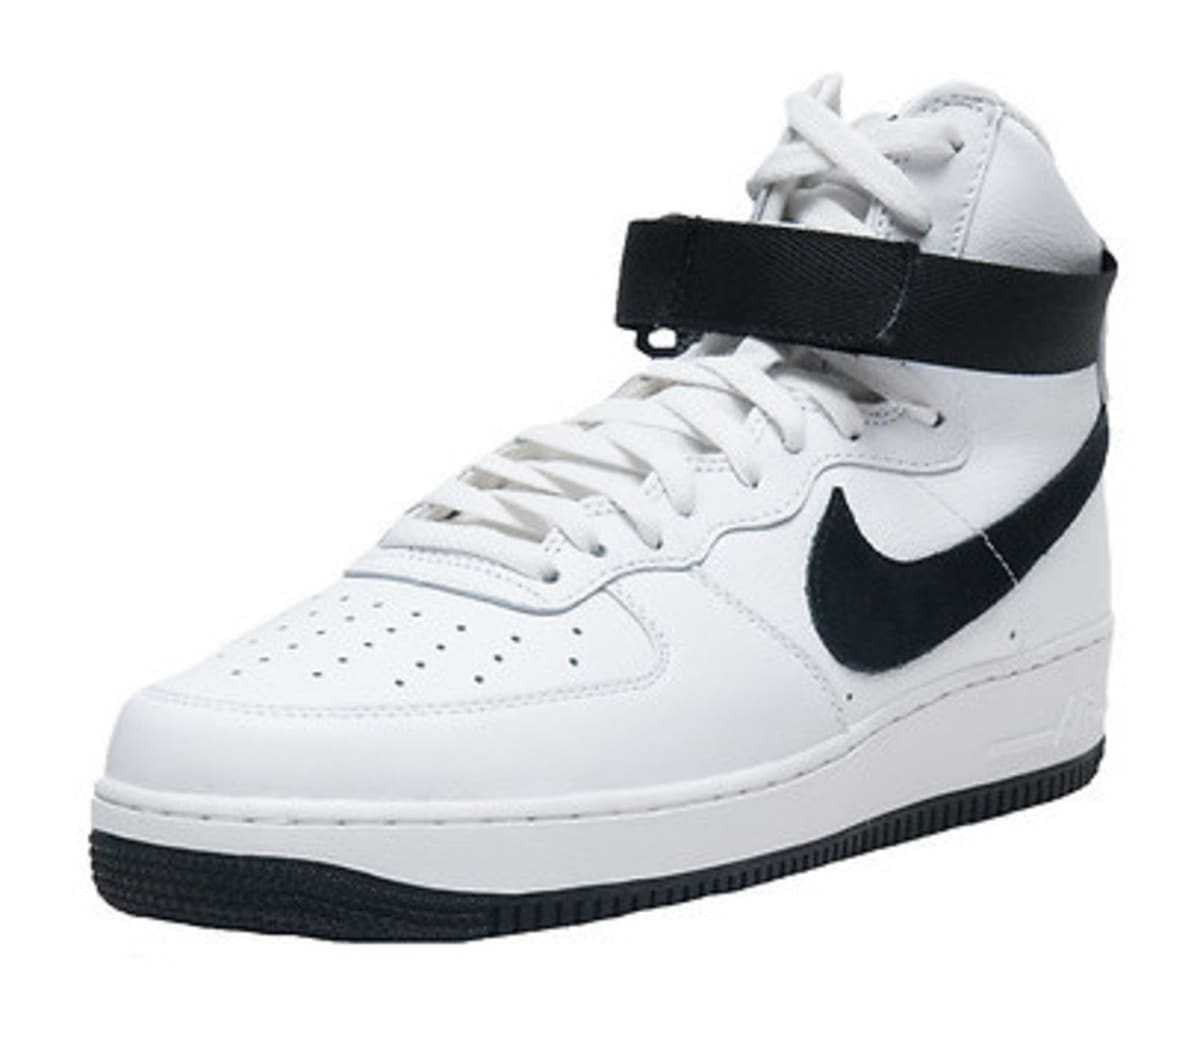 Nike AF1 High Retro - Sneakers On Sale | Sole Collector